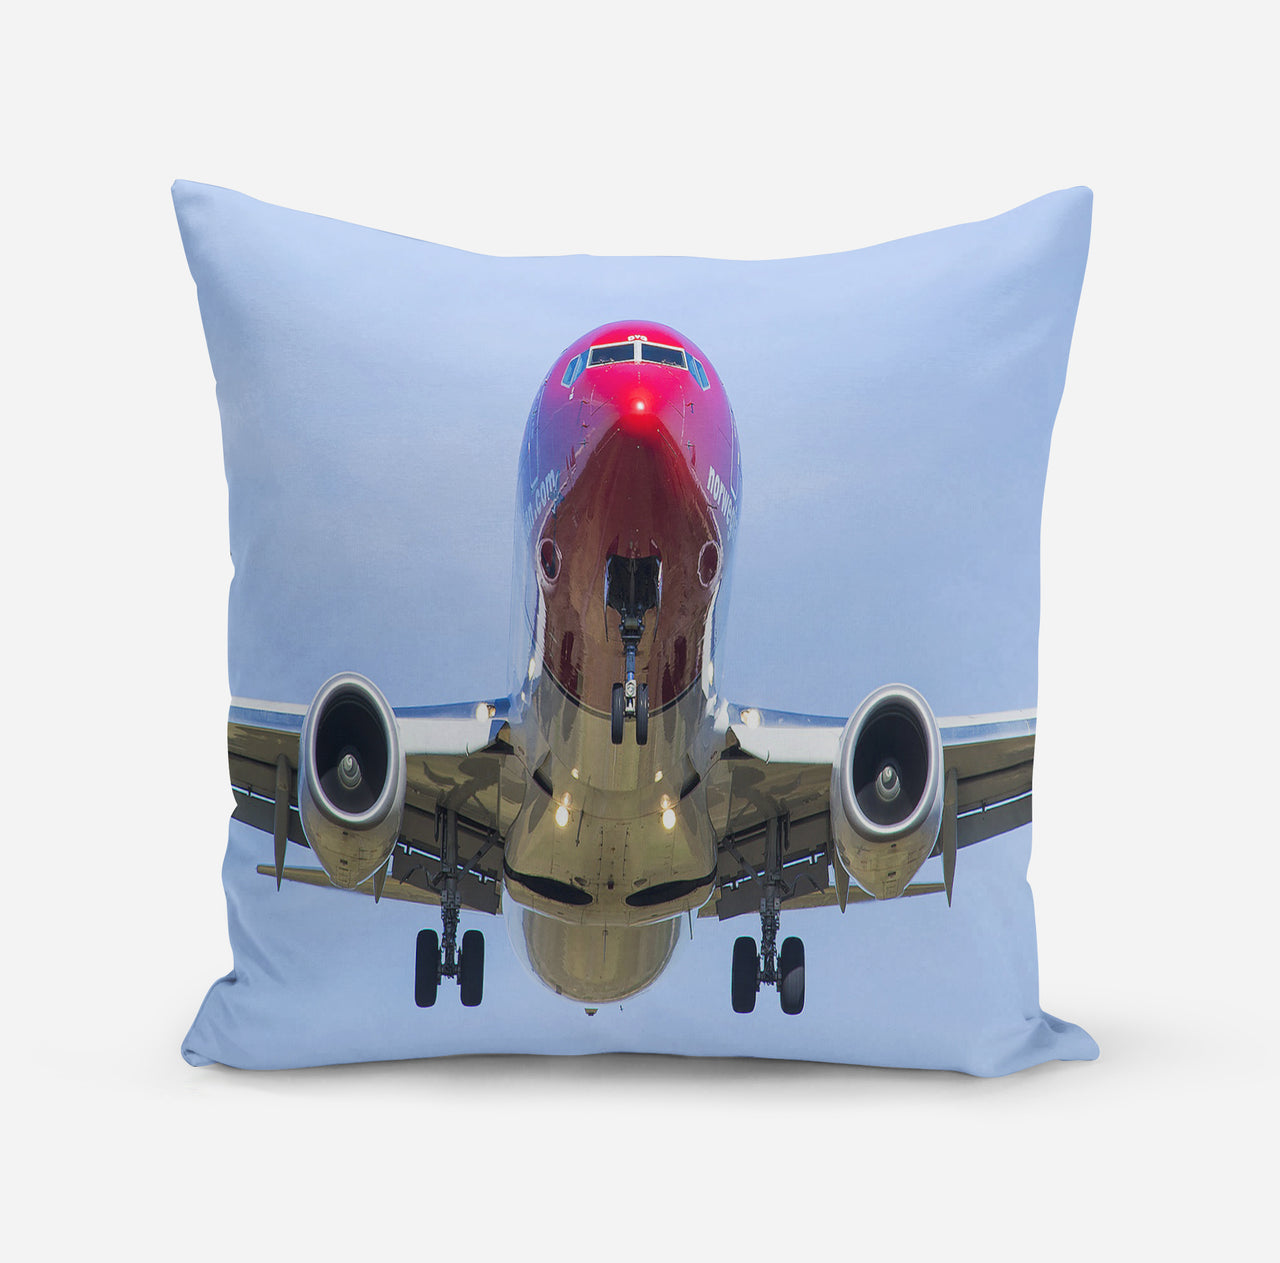 Face to Face with Norwegian Boeing 737 Designed Pillows